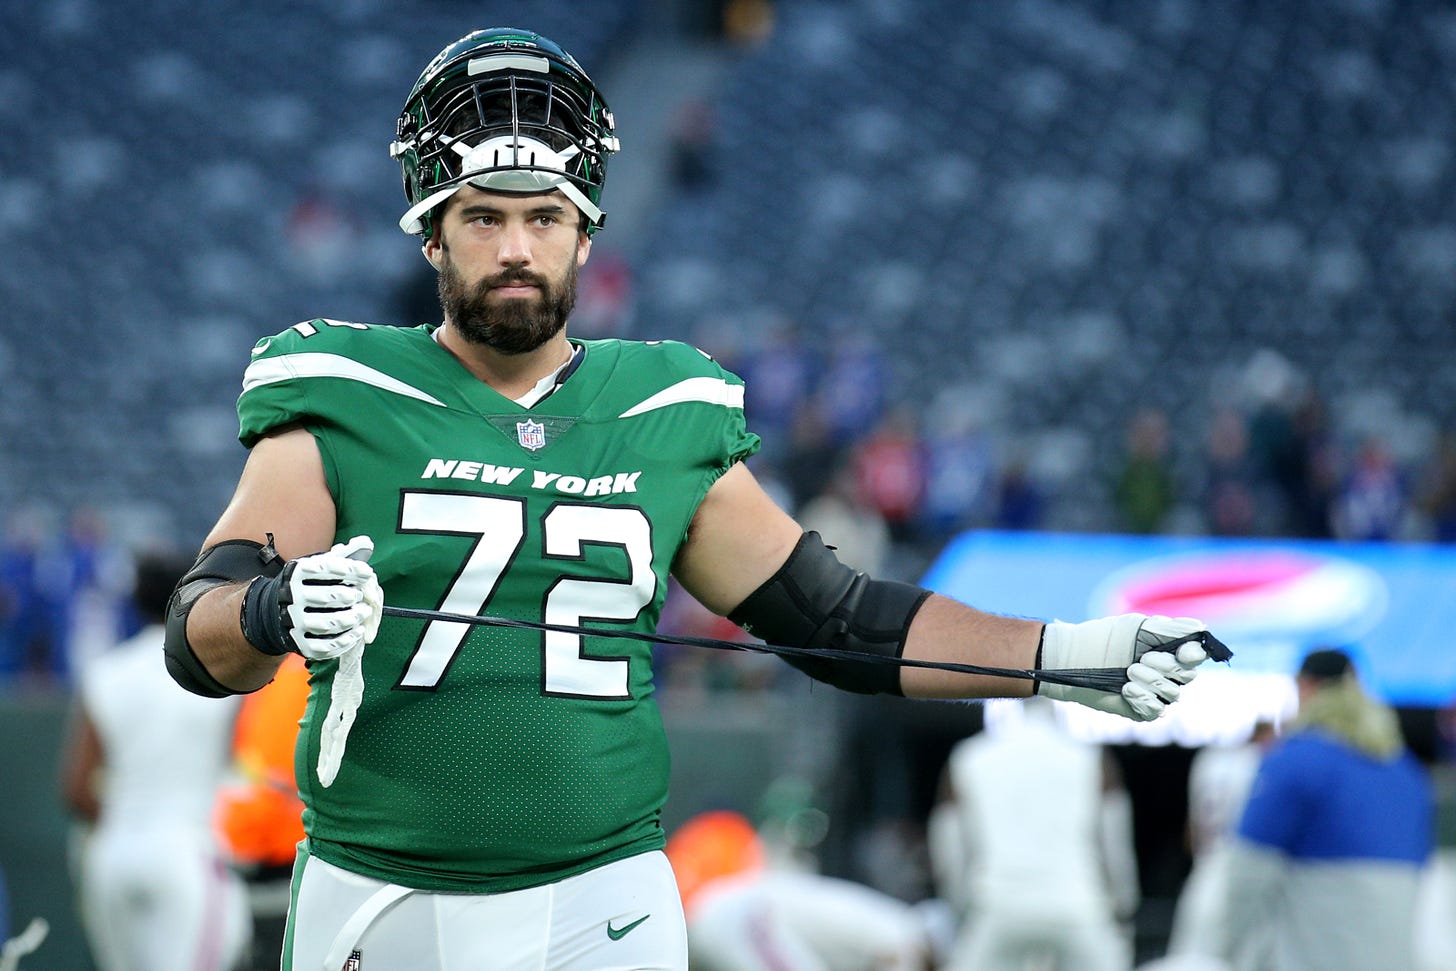 Laurent Duvernay-Tardif will contemplate future in football this offseason